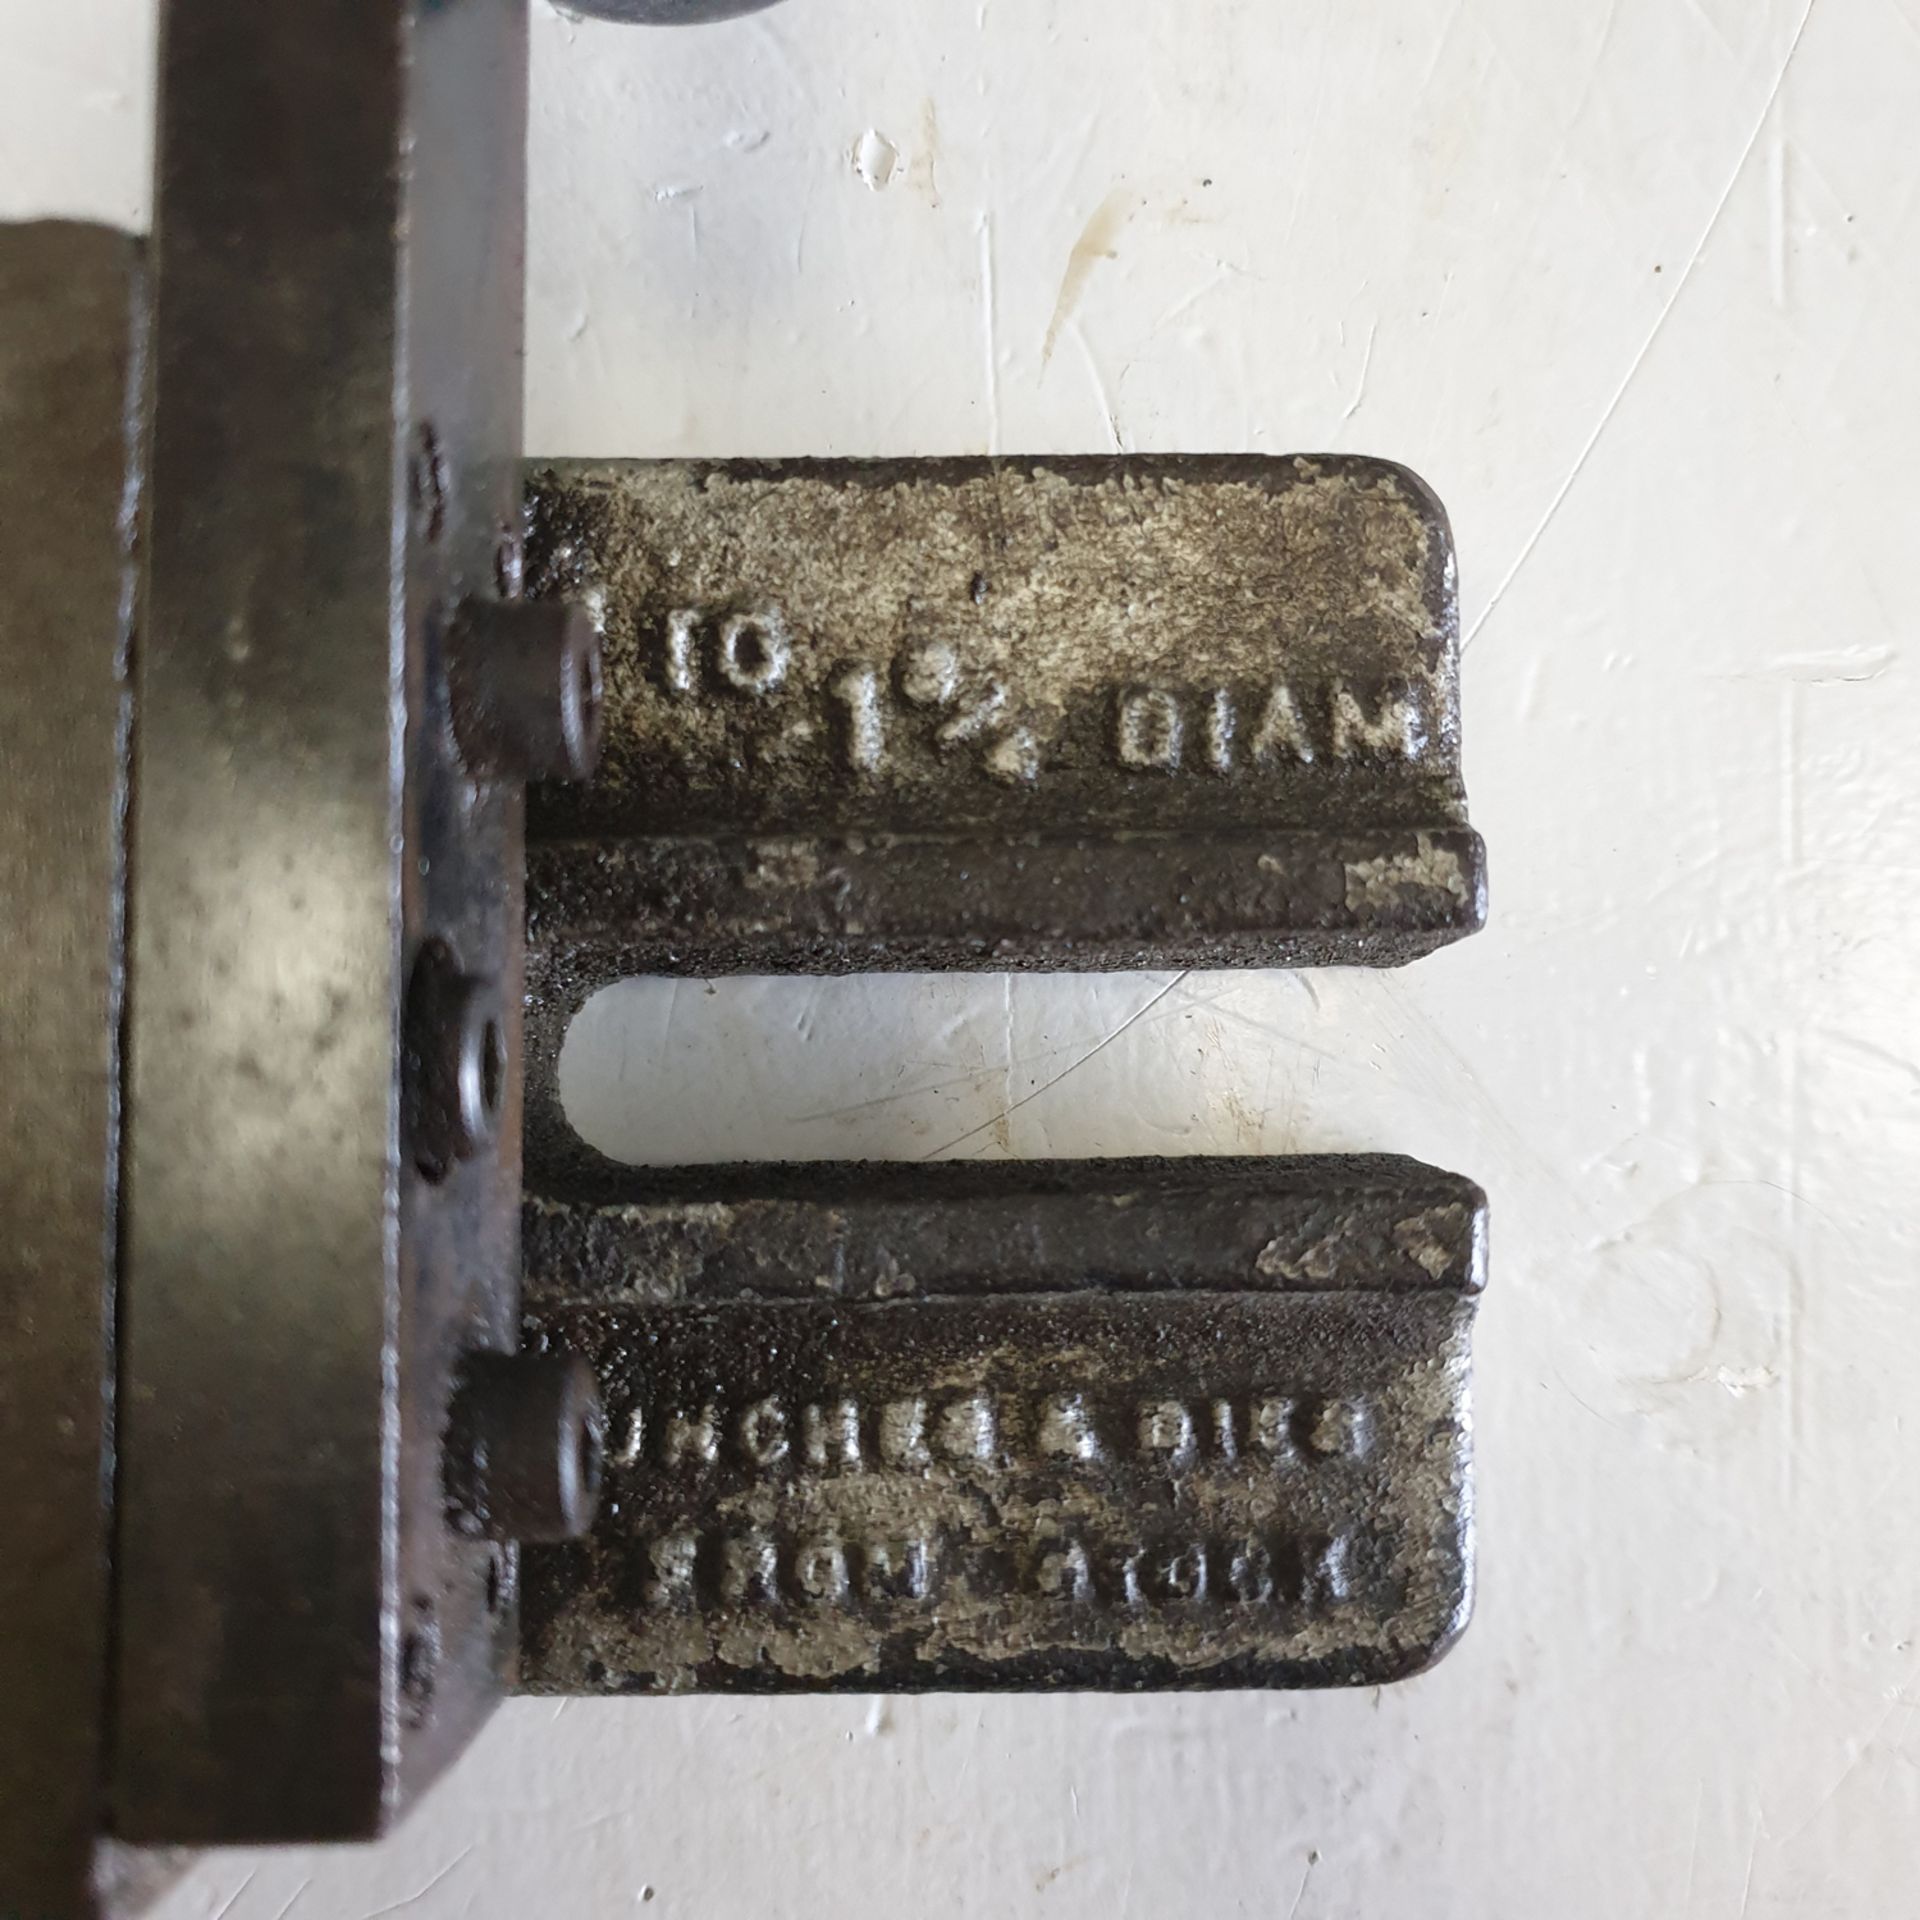 Two Universal Fly Press Bolster Outfits. Small Hunton 1/8" - 1 3/4" and Larger Other (Make Unknown). - Image 4 of 4